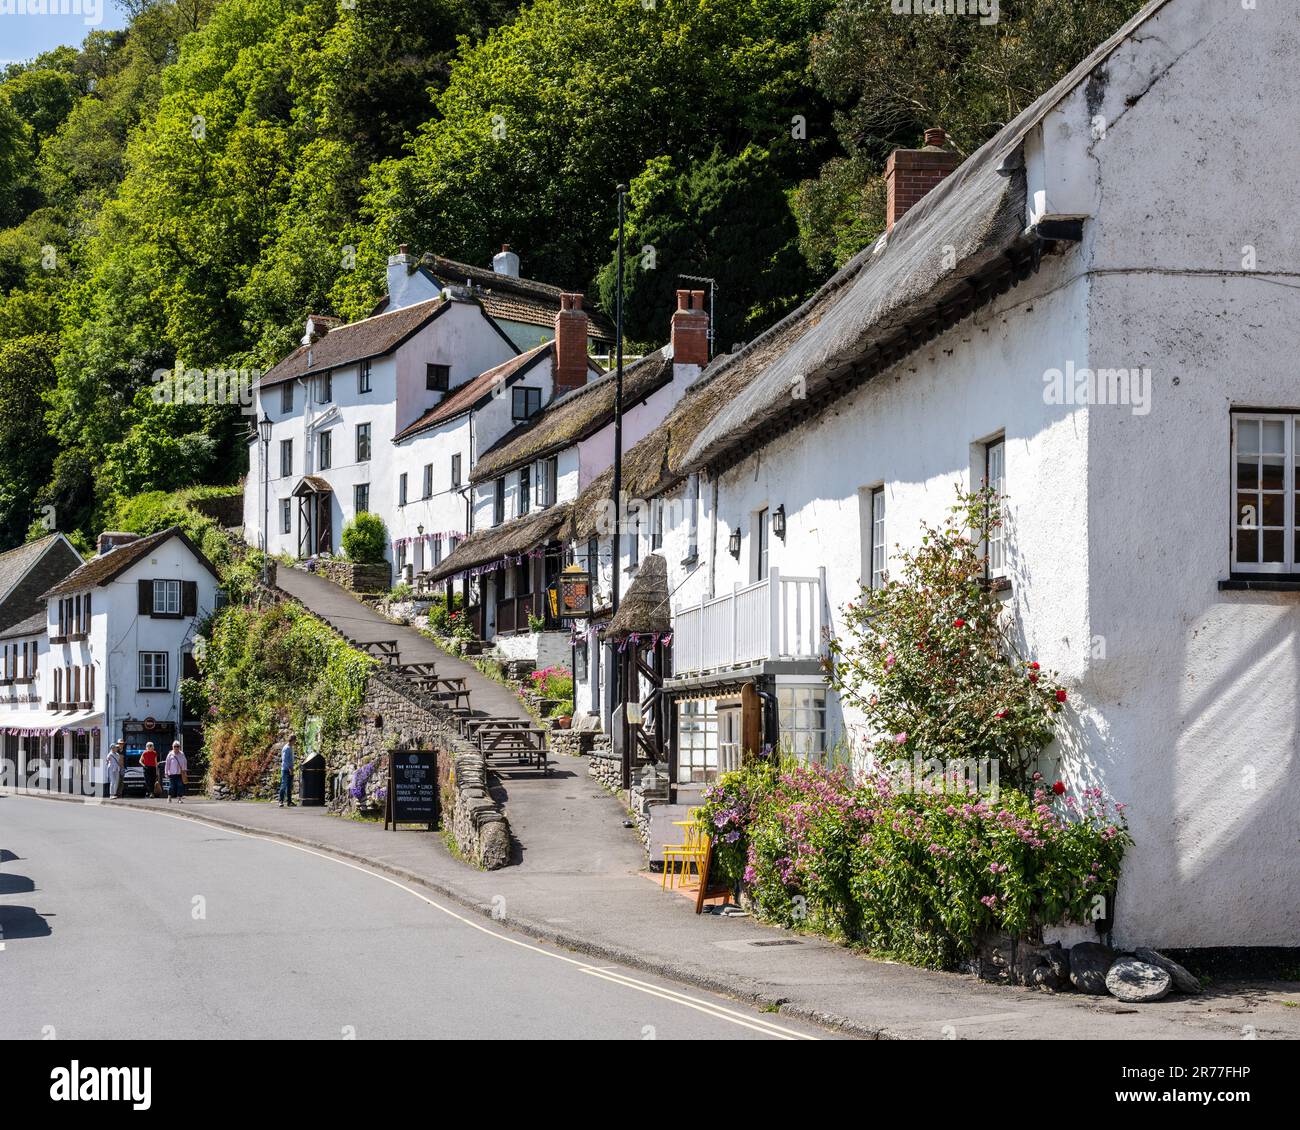 Quaint thatched cottages are stepped up a hillside in the Exmoor village of Lynmouth, North Devon. Stock Photo